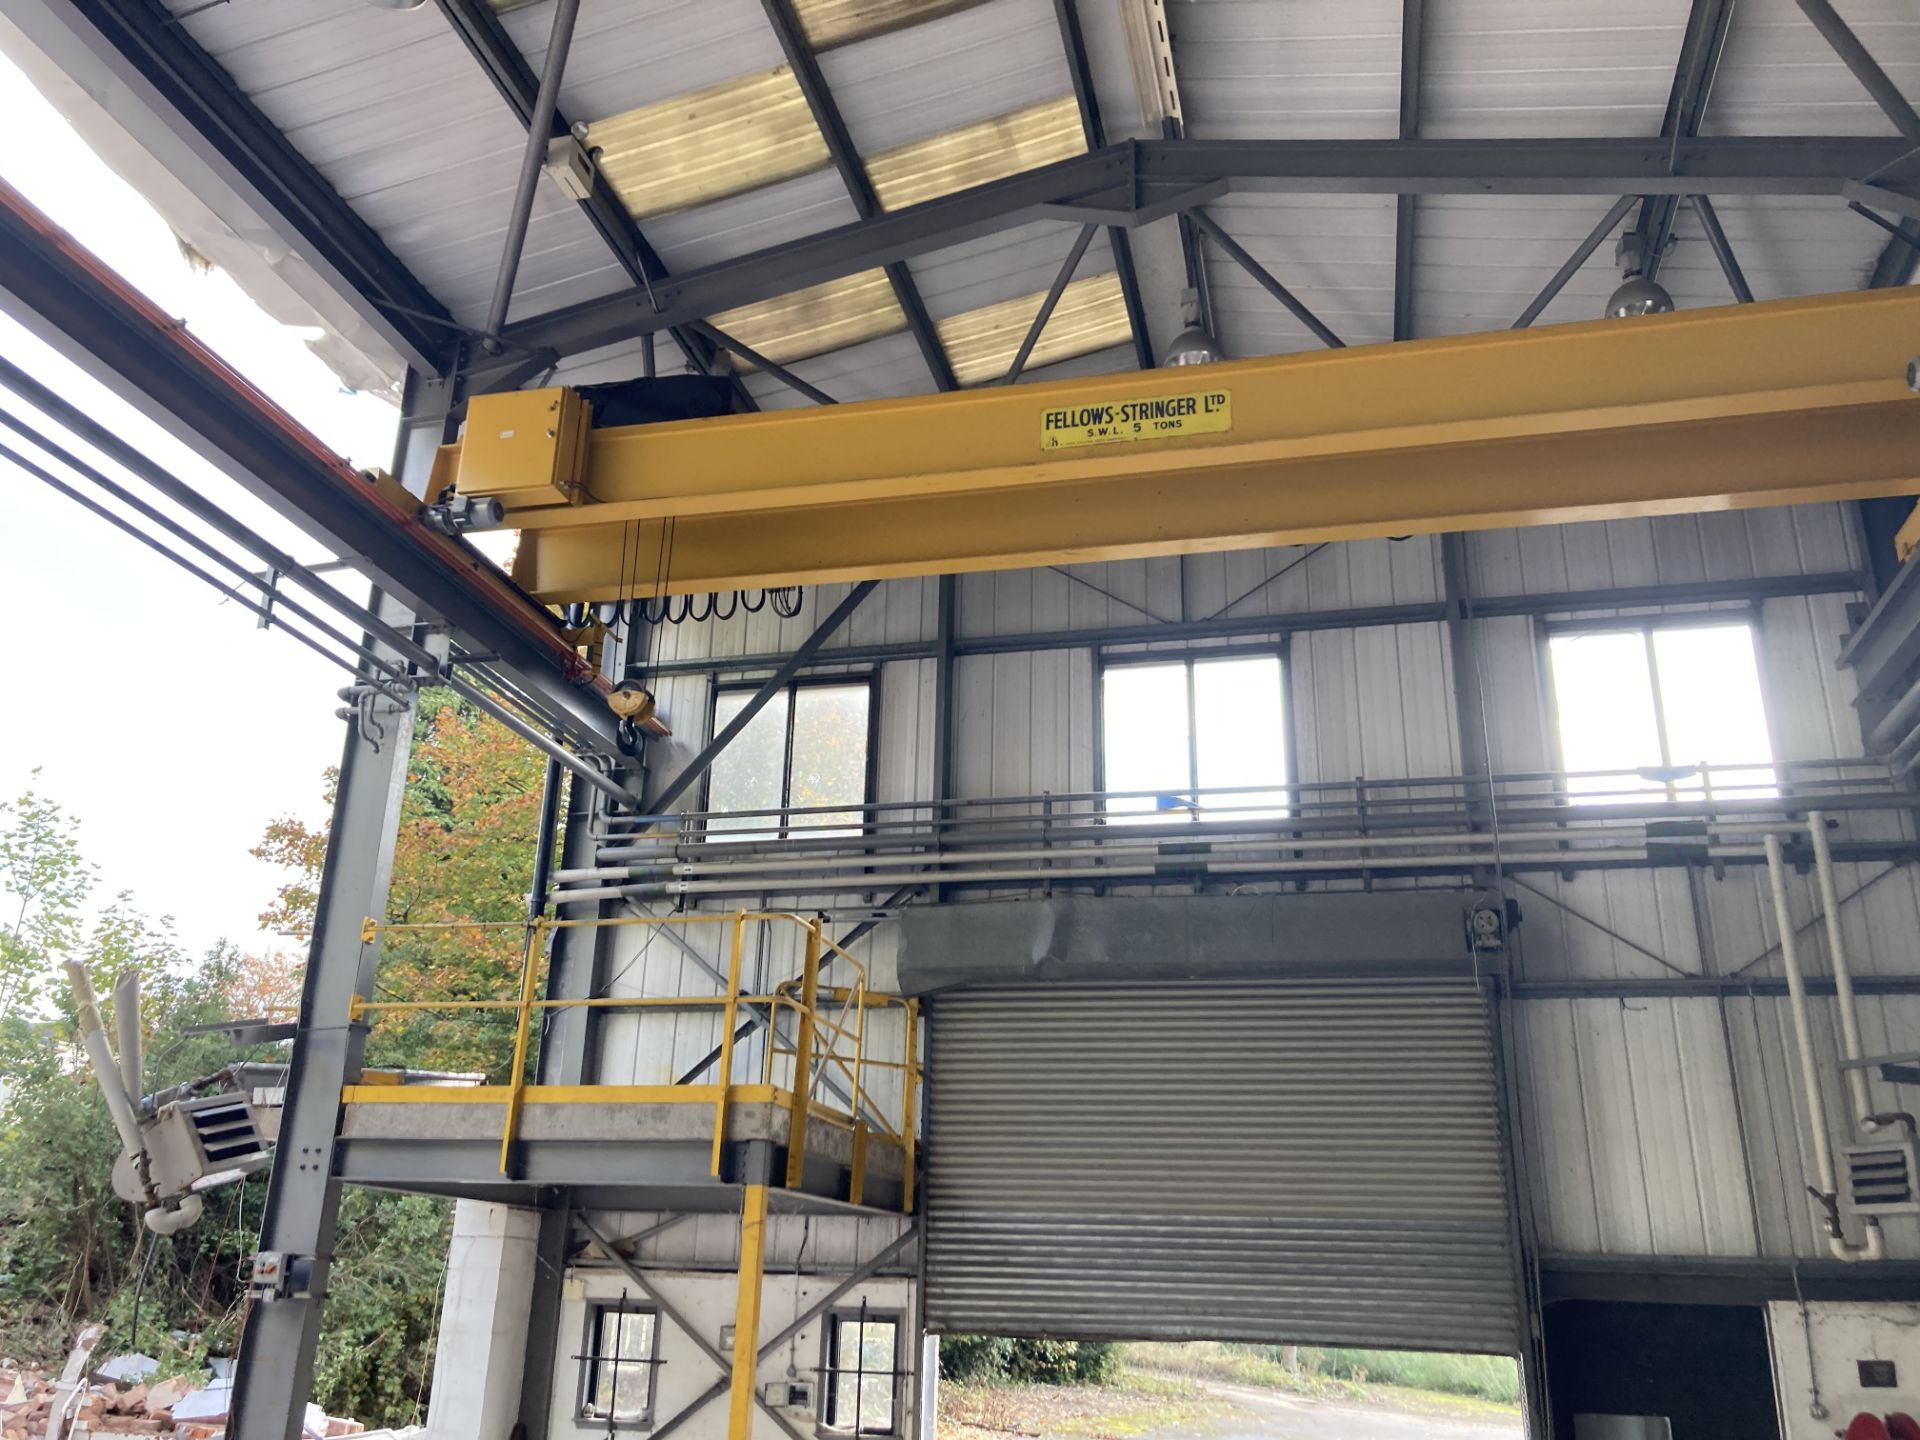 Fellows-Stringer 5 TON TWIN GIRDER OVERHEAD TRAVELLING CRANE, approx. width of crane – 10.73m x - Image 3 of 11